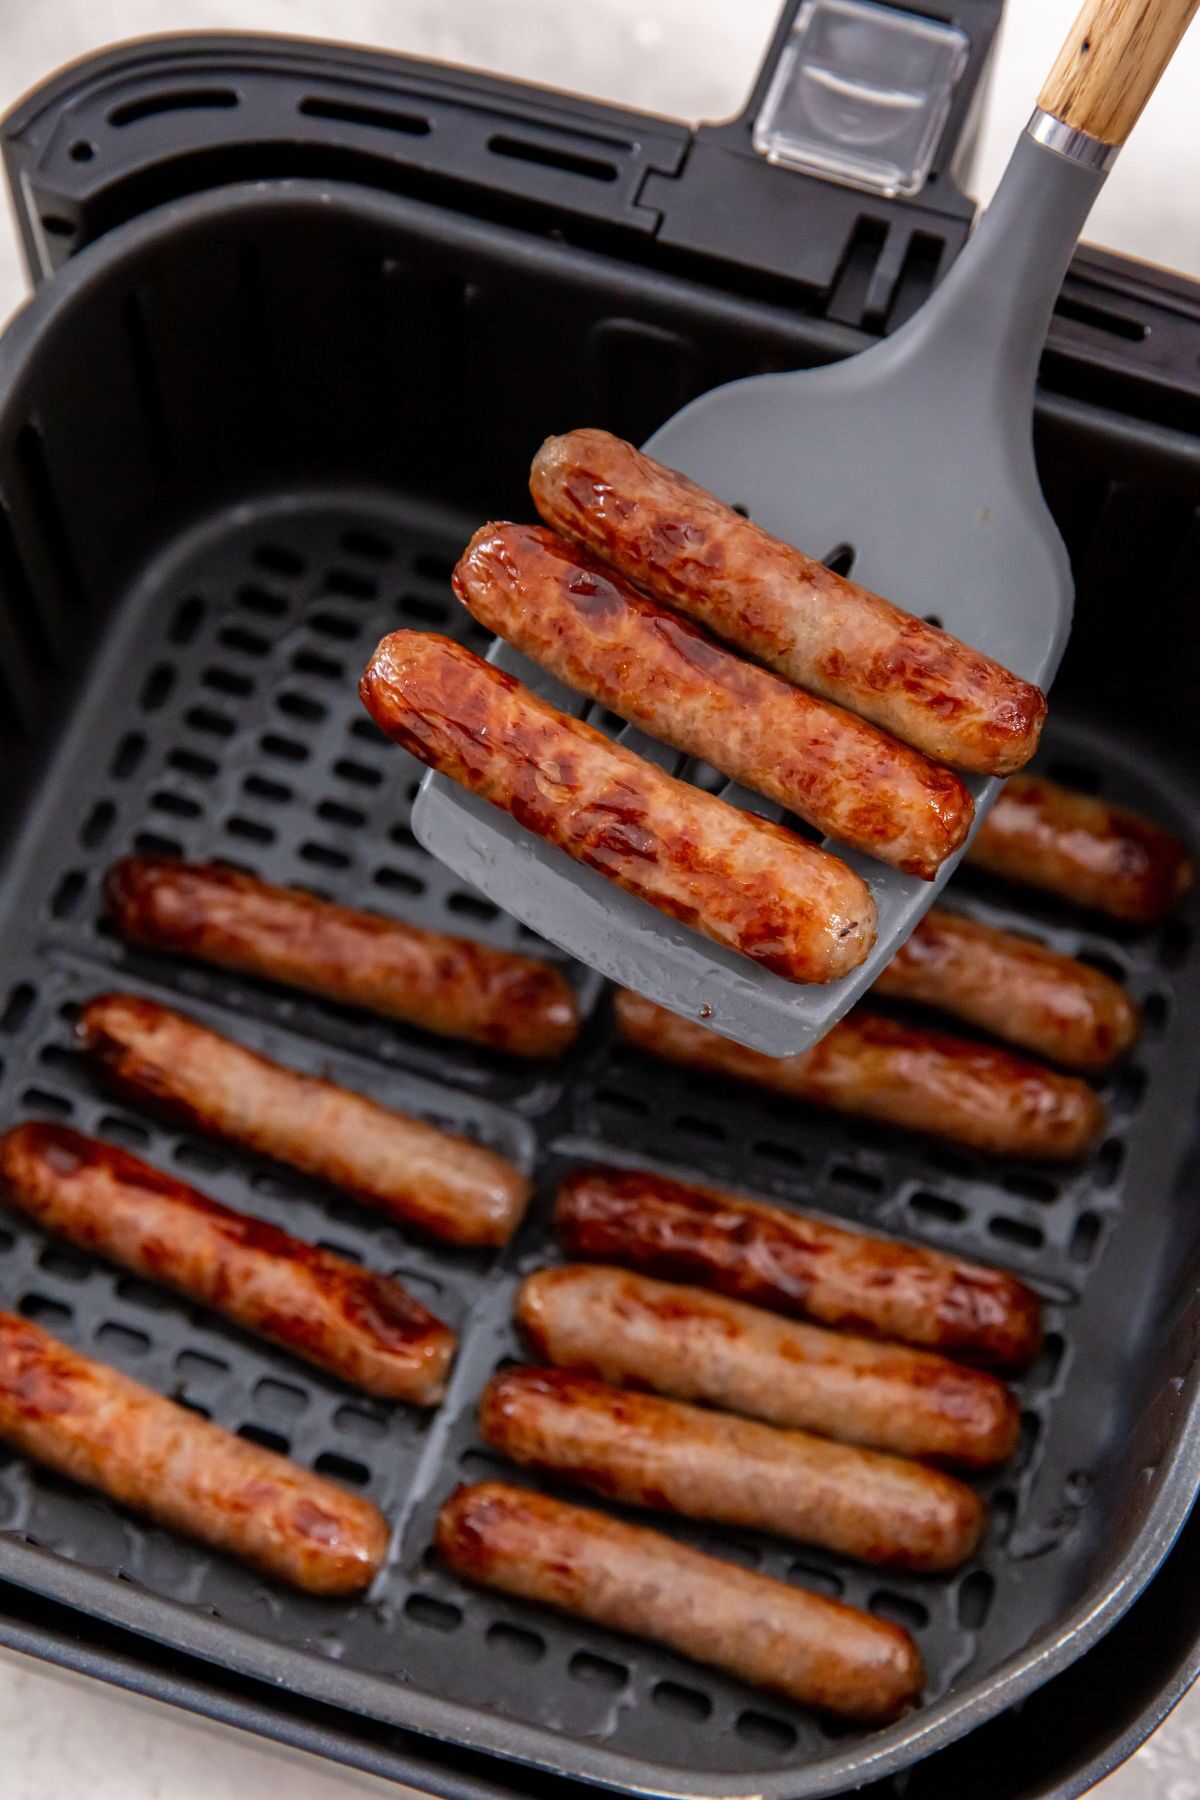 breakfast sausage in the air fryer basket with some on a spatula